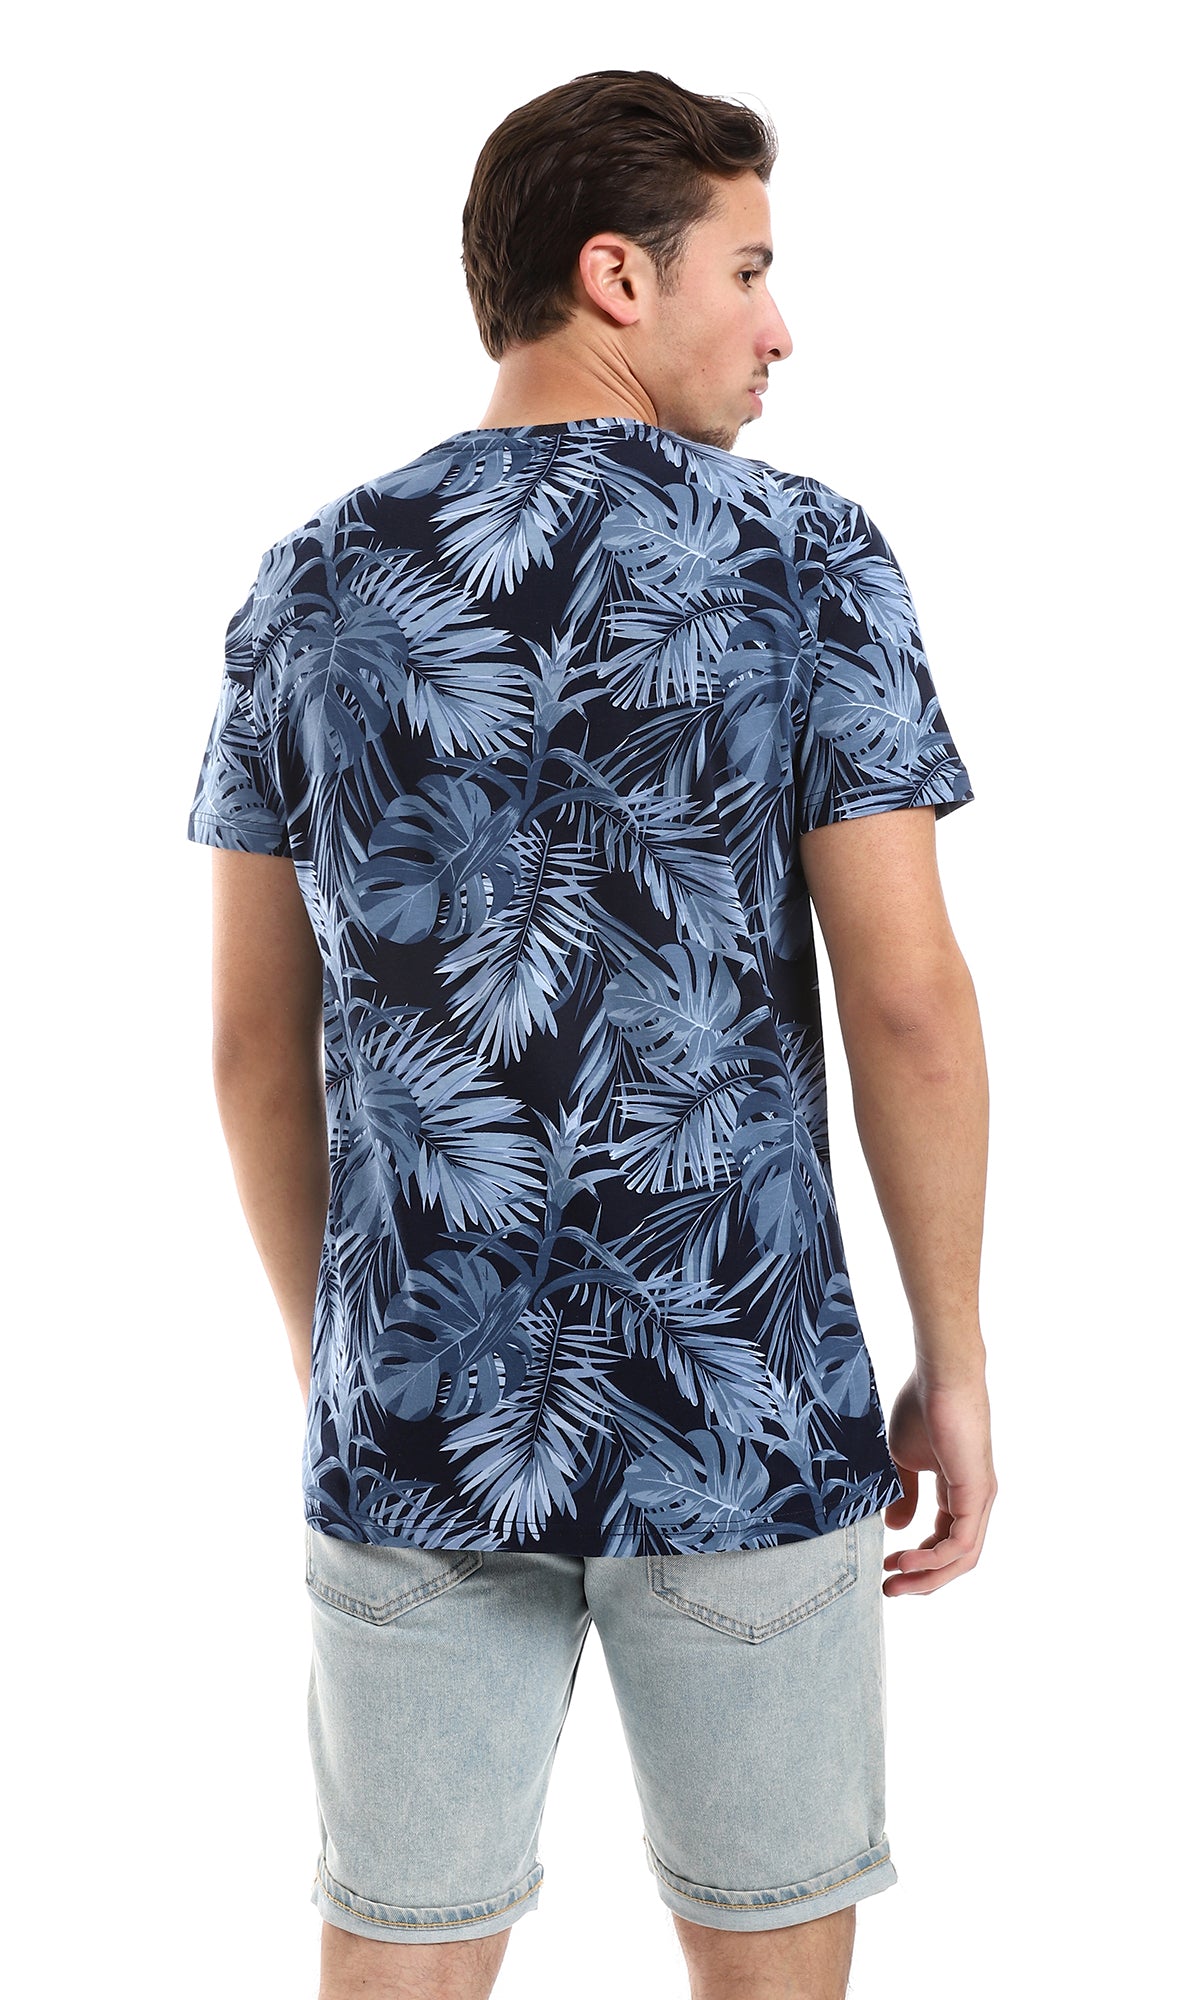 O164745 Navy Blue & Blue Leaves Patterned Tee